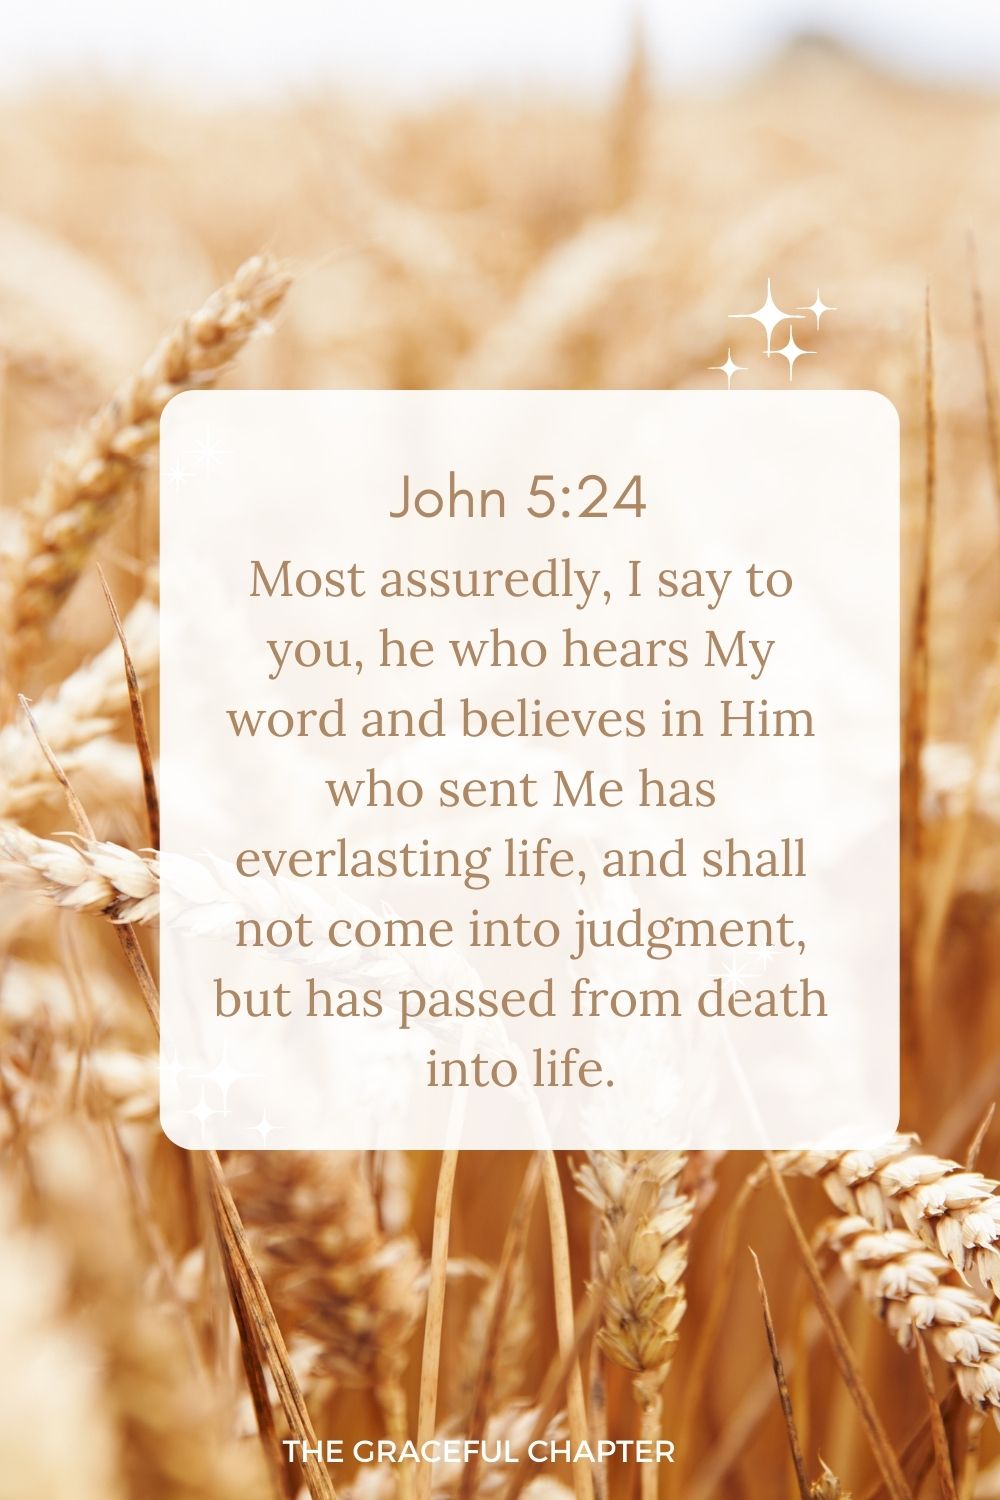 Most assuredly, I say to you, he who hears My word and believes in Him who sent Me has everlasting life, and shall not come into judgment, but has passed from death into life. John 5:24